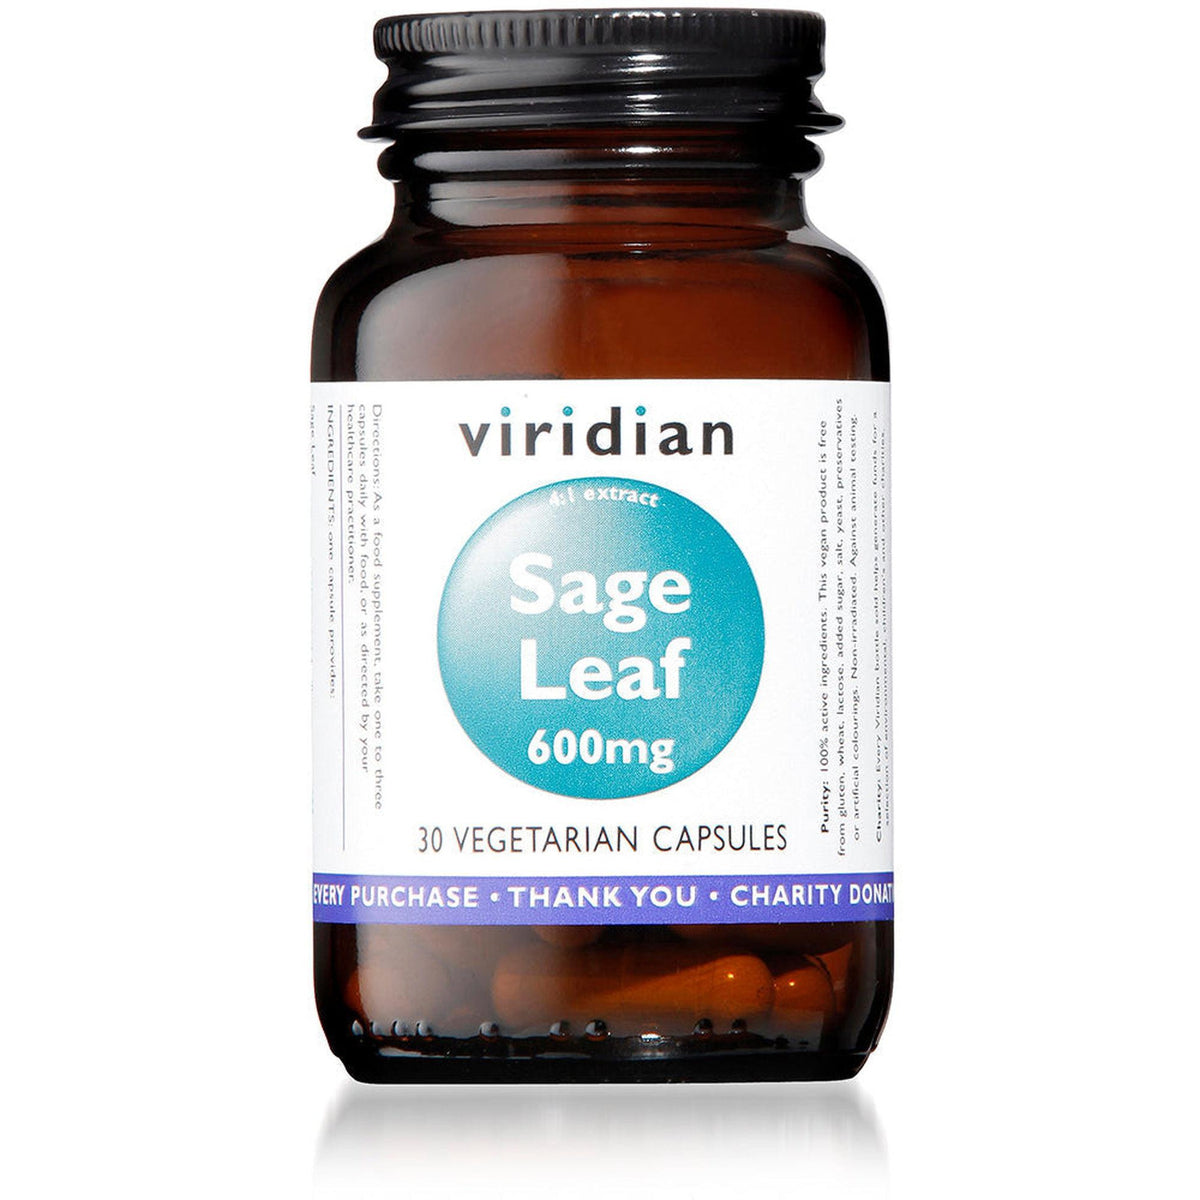 Viridian Sage Leaf Extract 600mg 30 Veg Caps- Lillys Pharmacy and Health Store